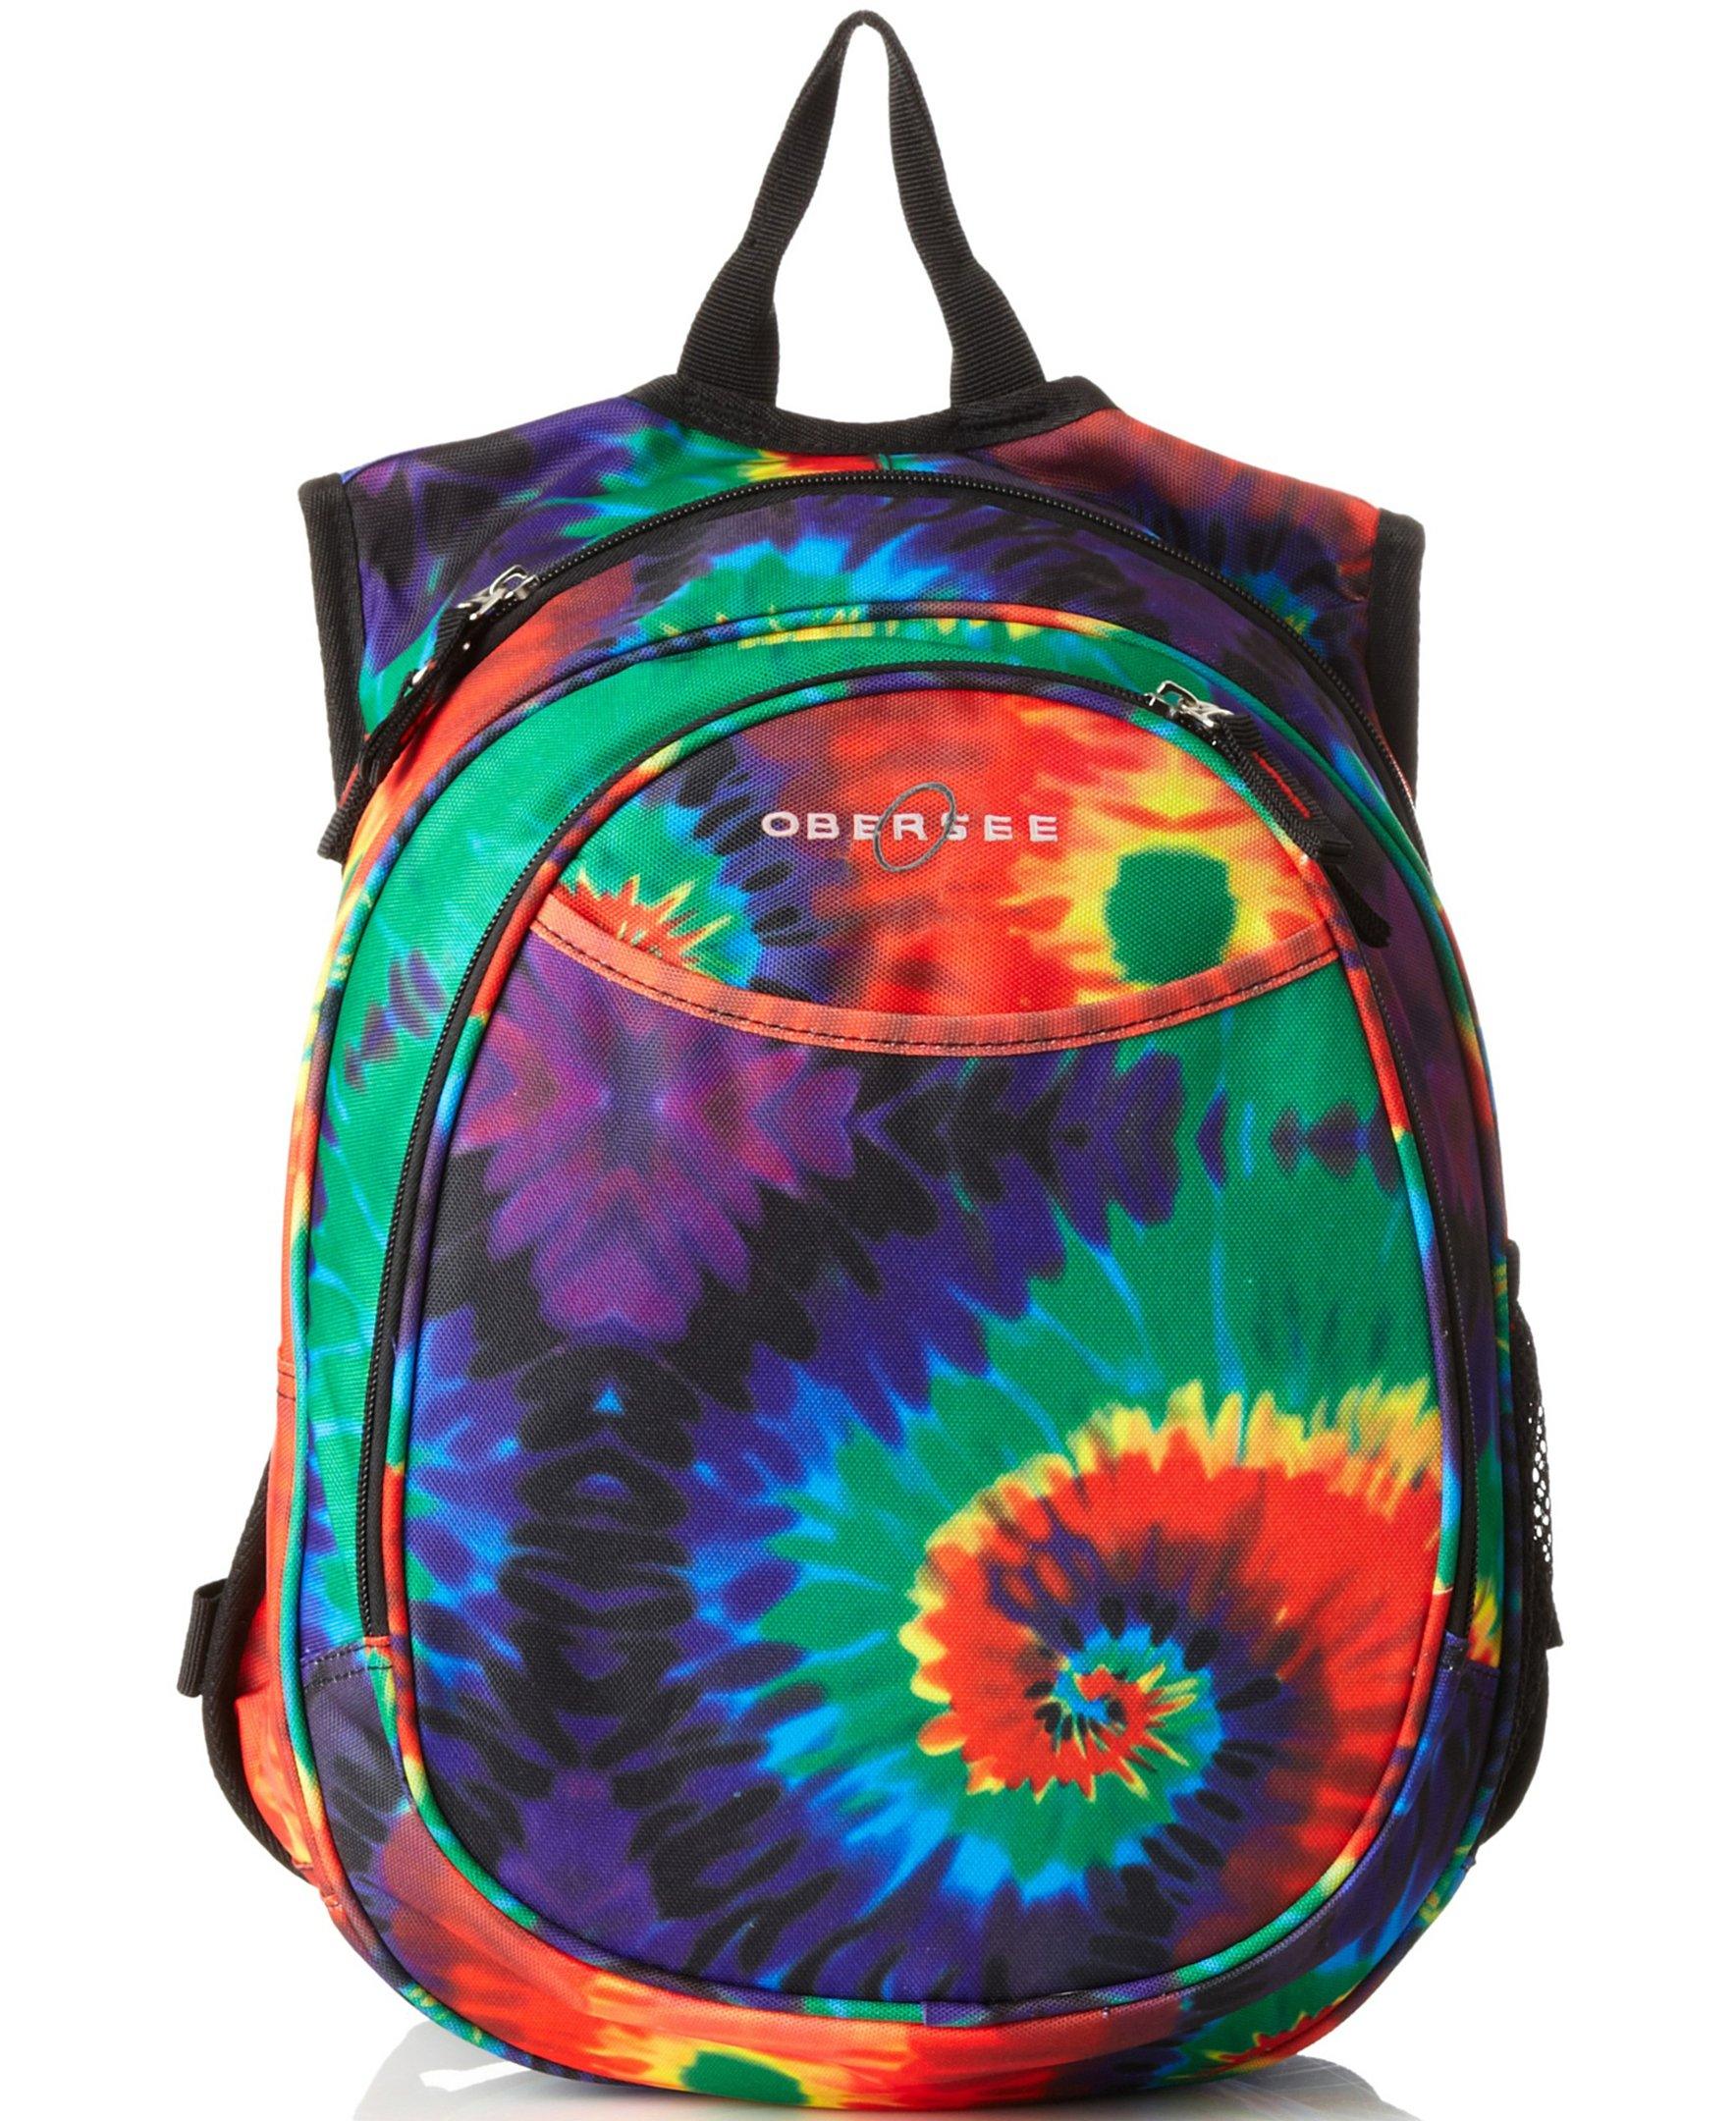 O3KCBP011 Obersee Mini Preschool All-in-One Backpack for Toddlers and Kids with integrated Insulated Cooler | Tie Dye - image 1 of 3